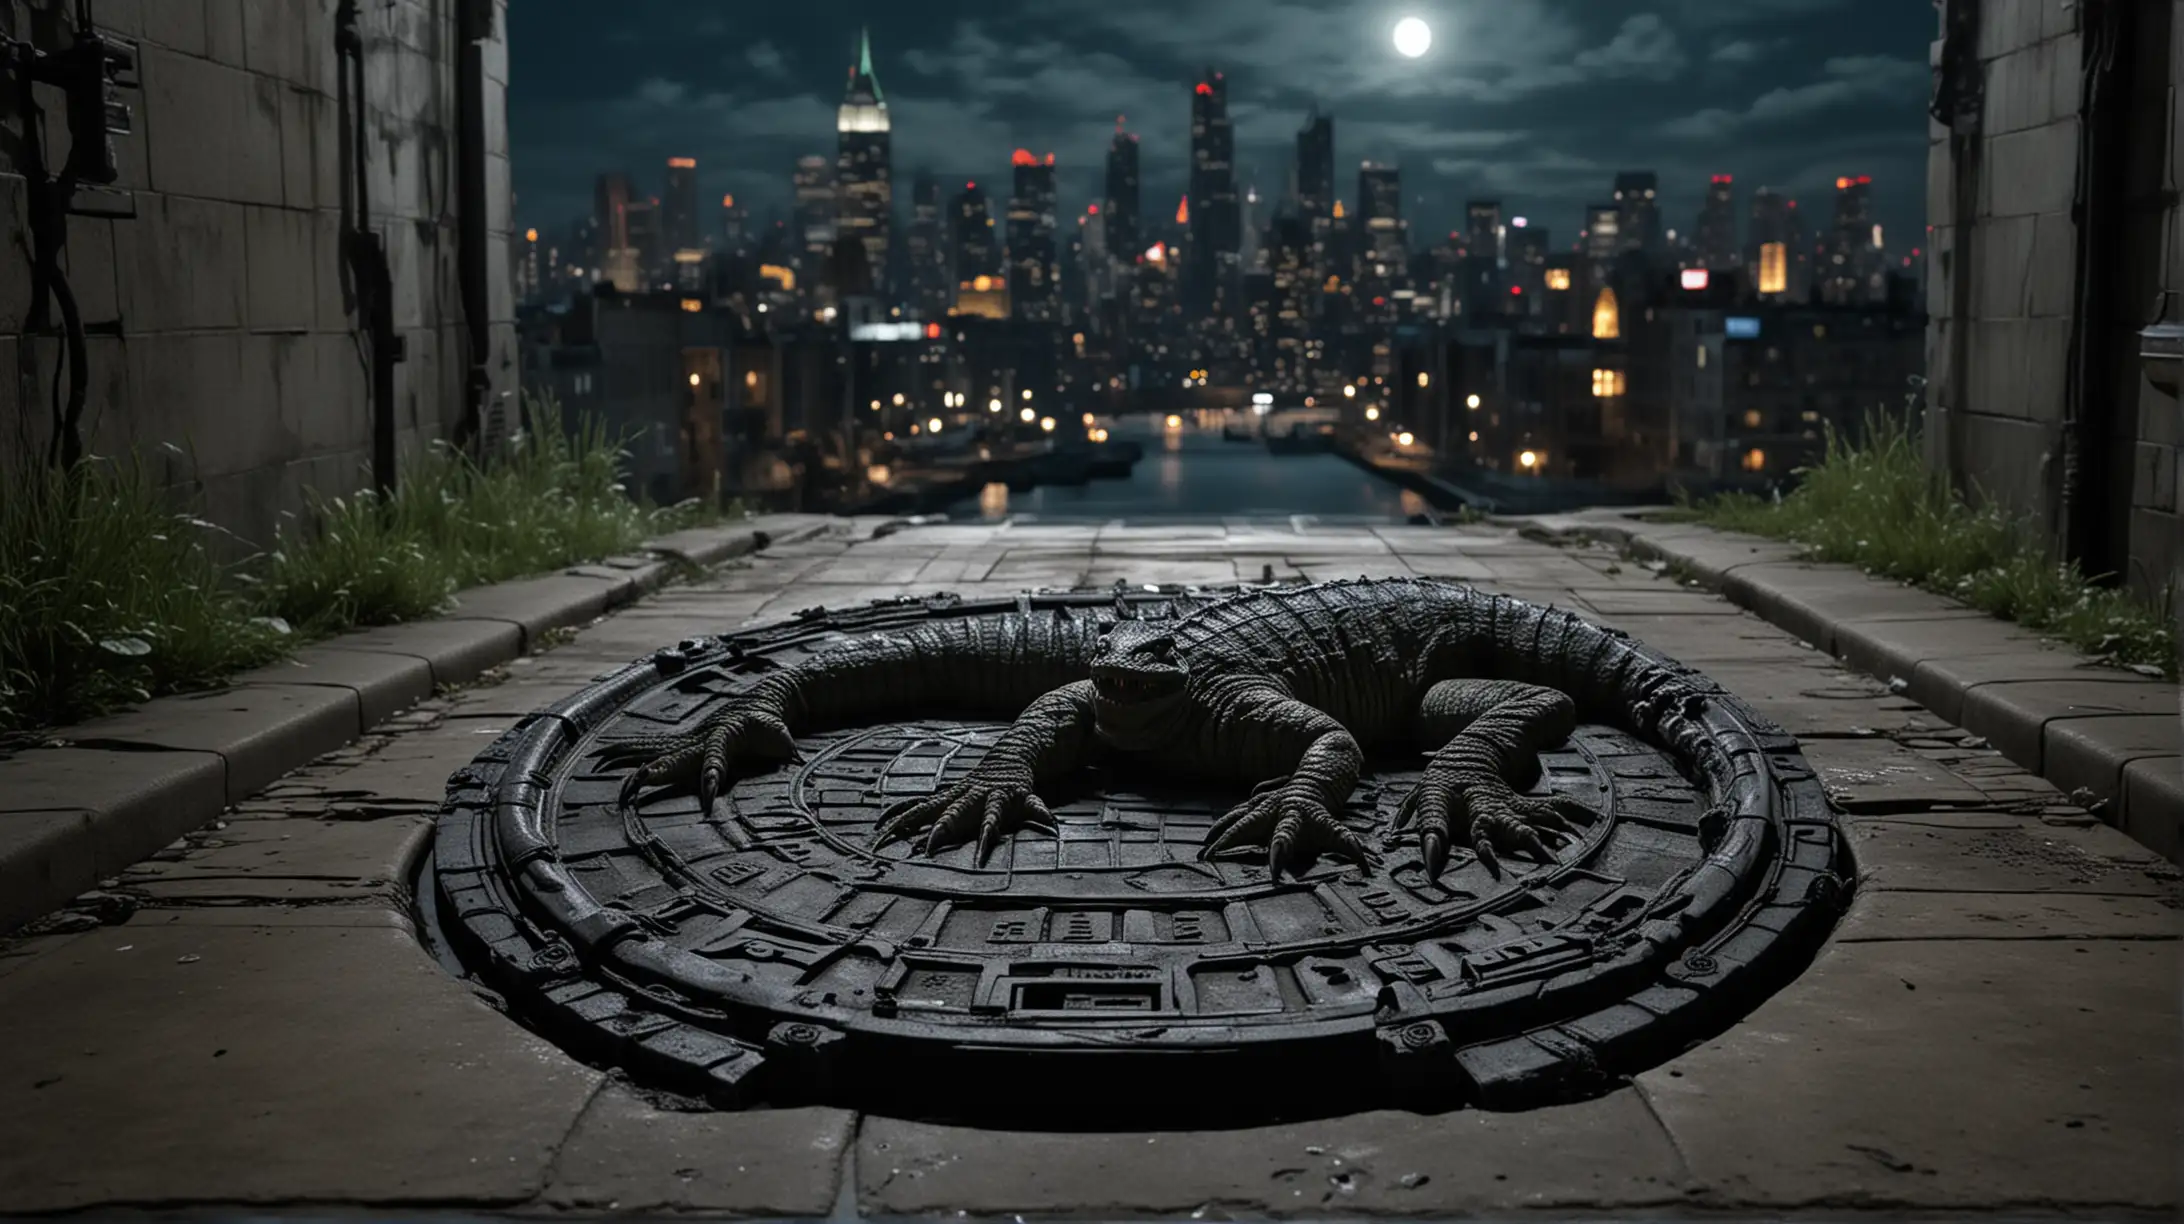 a mutant reptile hand grips the inside of a sewer cover with the city in the backdrop at night